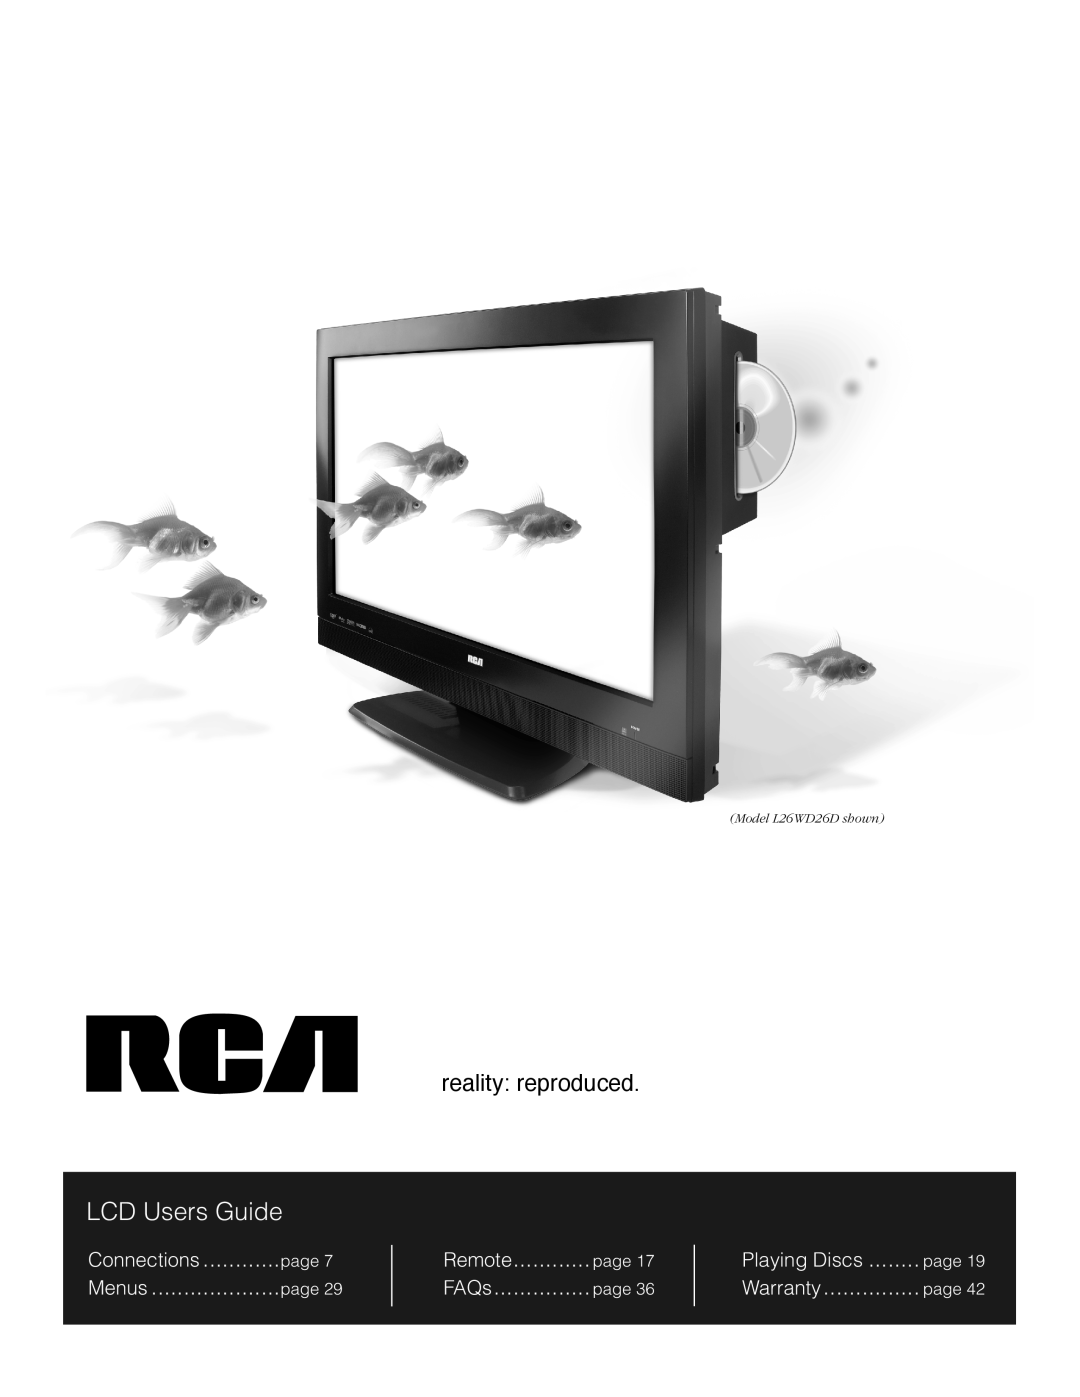 RCA L26WD26D warranty LCD Users Guide, reality reproduced, Remote, FAQs, Warranty, Menus, Connections, Playing Discs, page 